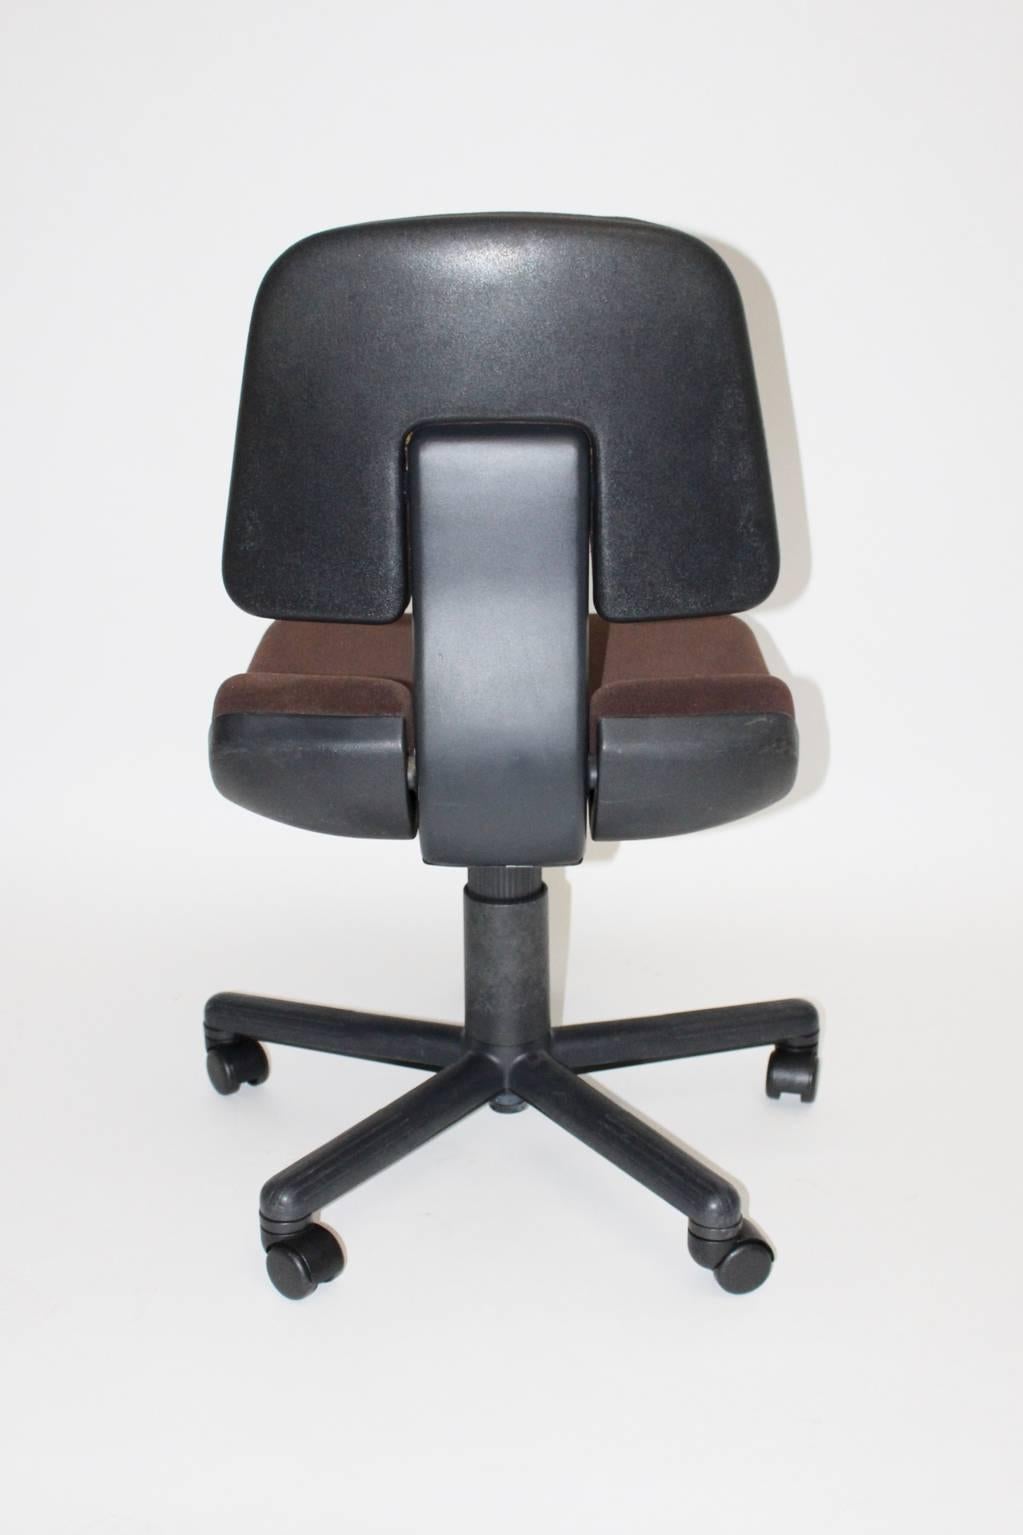 Office Chair Vintage Vitramat by Wolfgang Mueller Deisig 1976 Vitra Switzerland In Good Condition For Sale In Vienna, AT